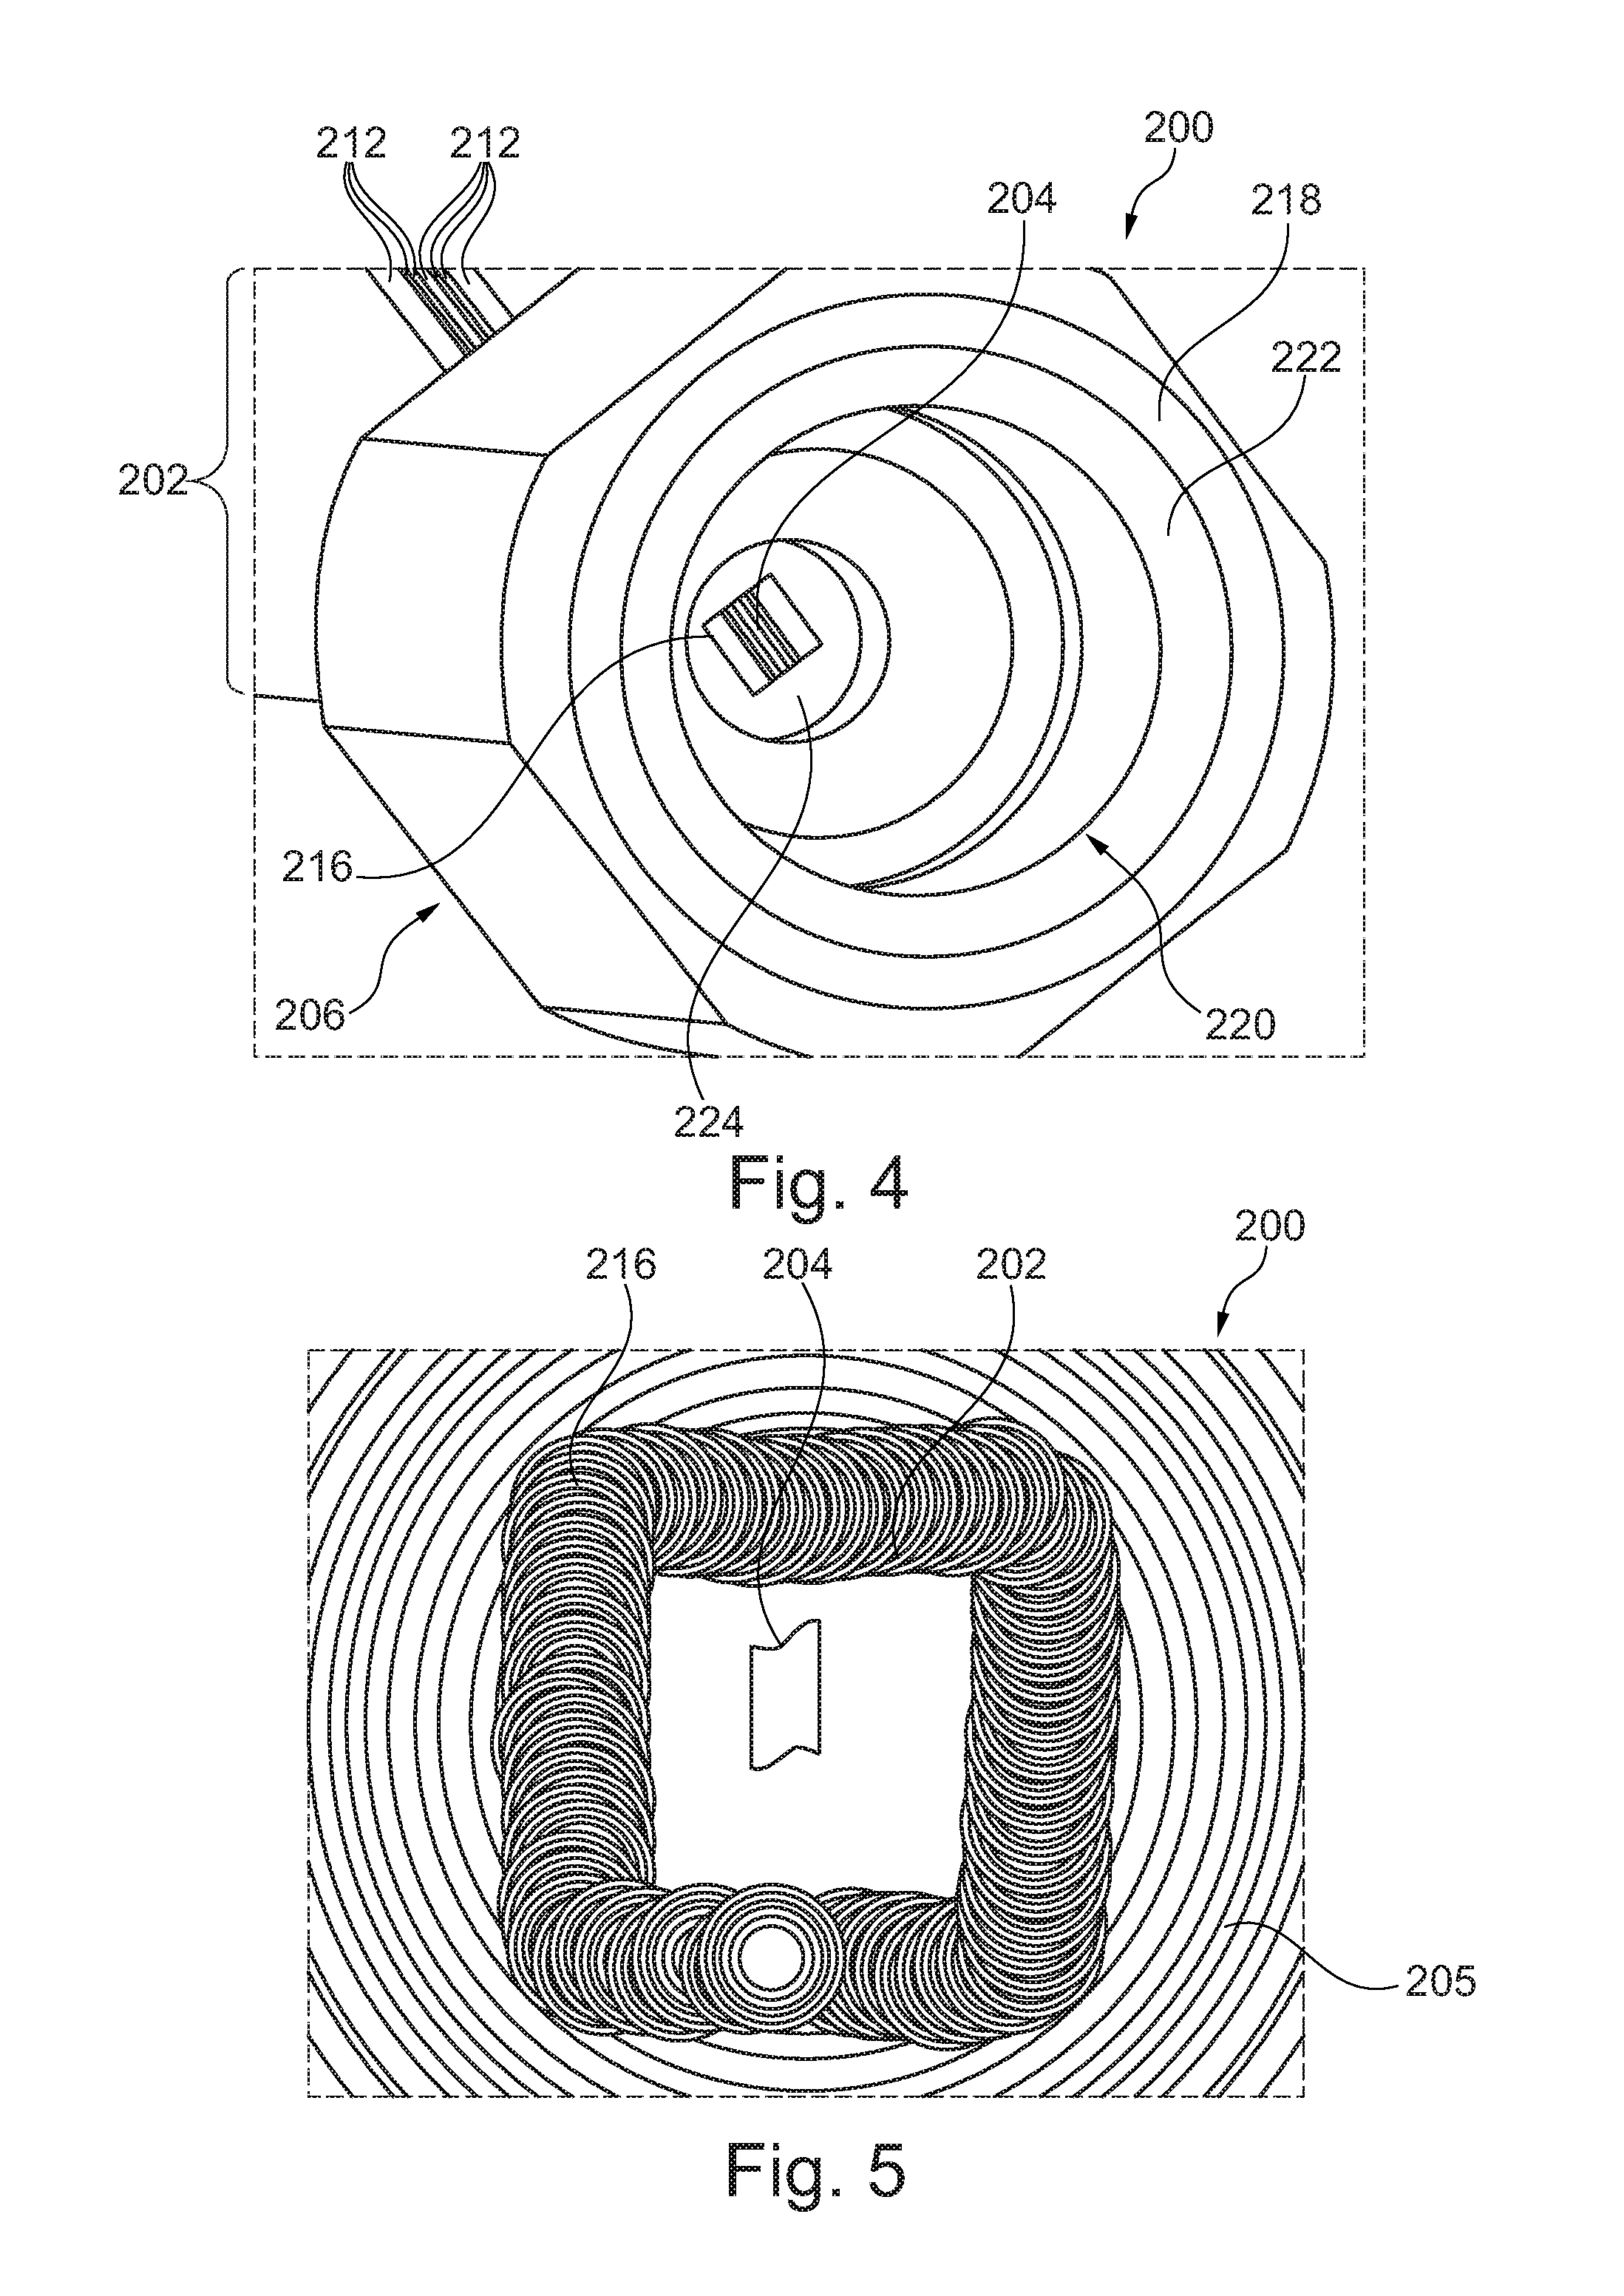 Integrated fluidic connection of planar structures for sample separation devices